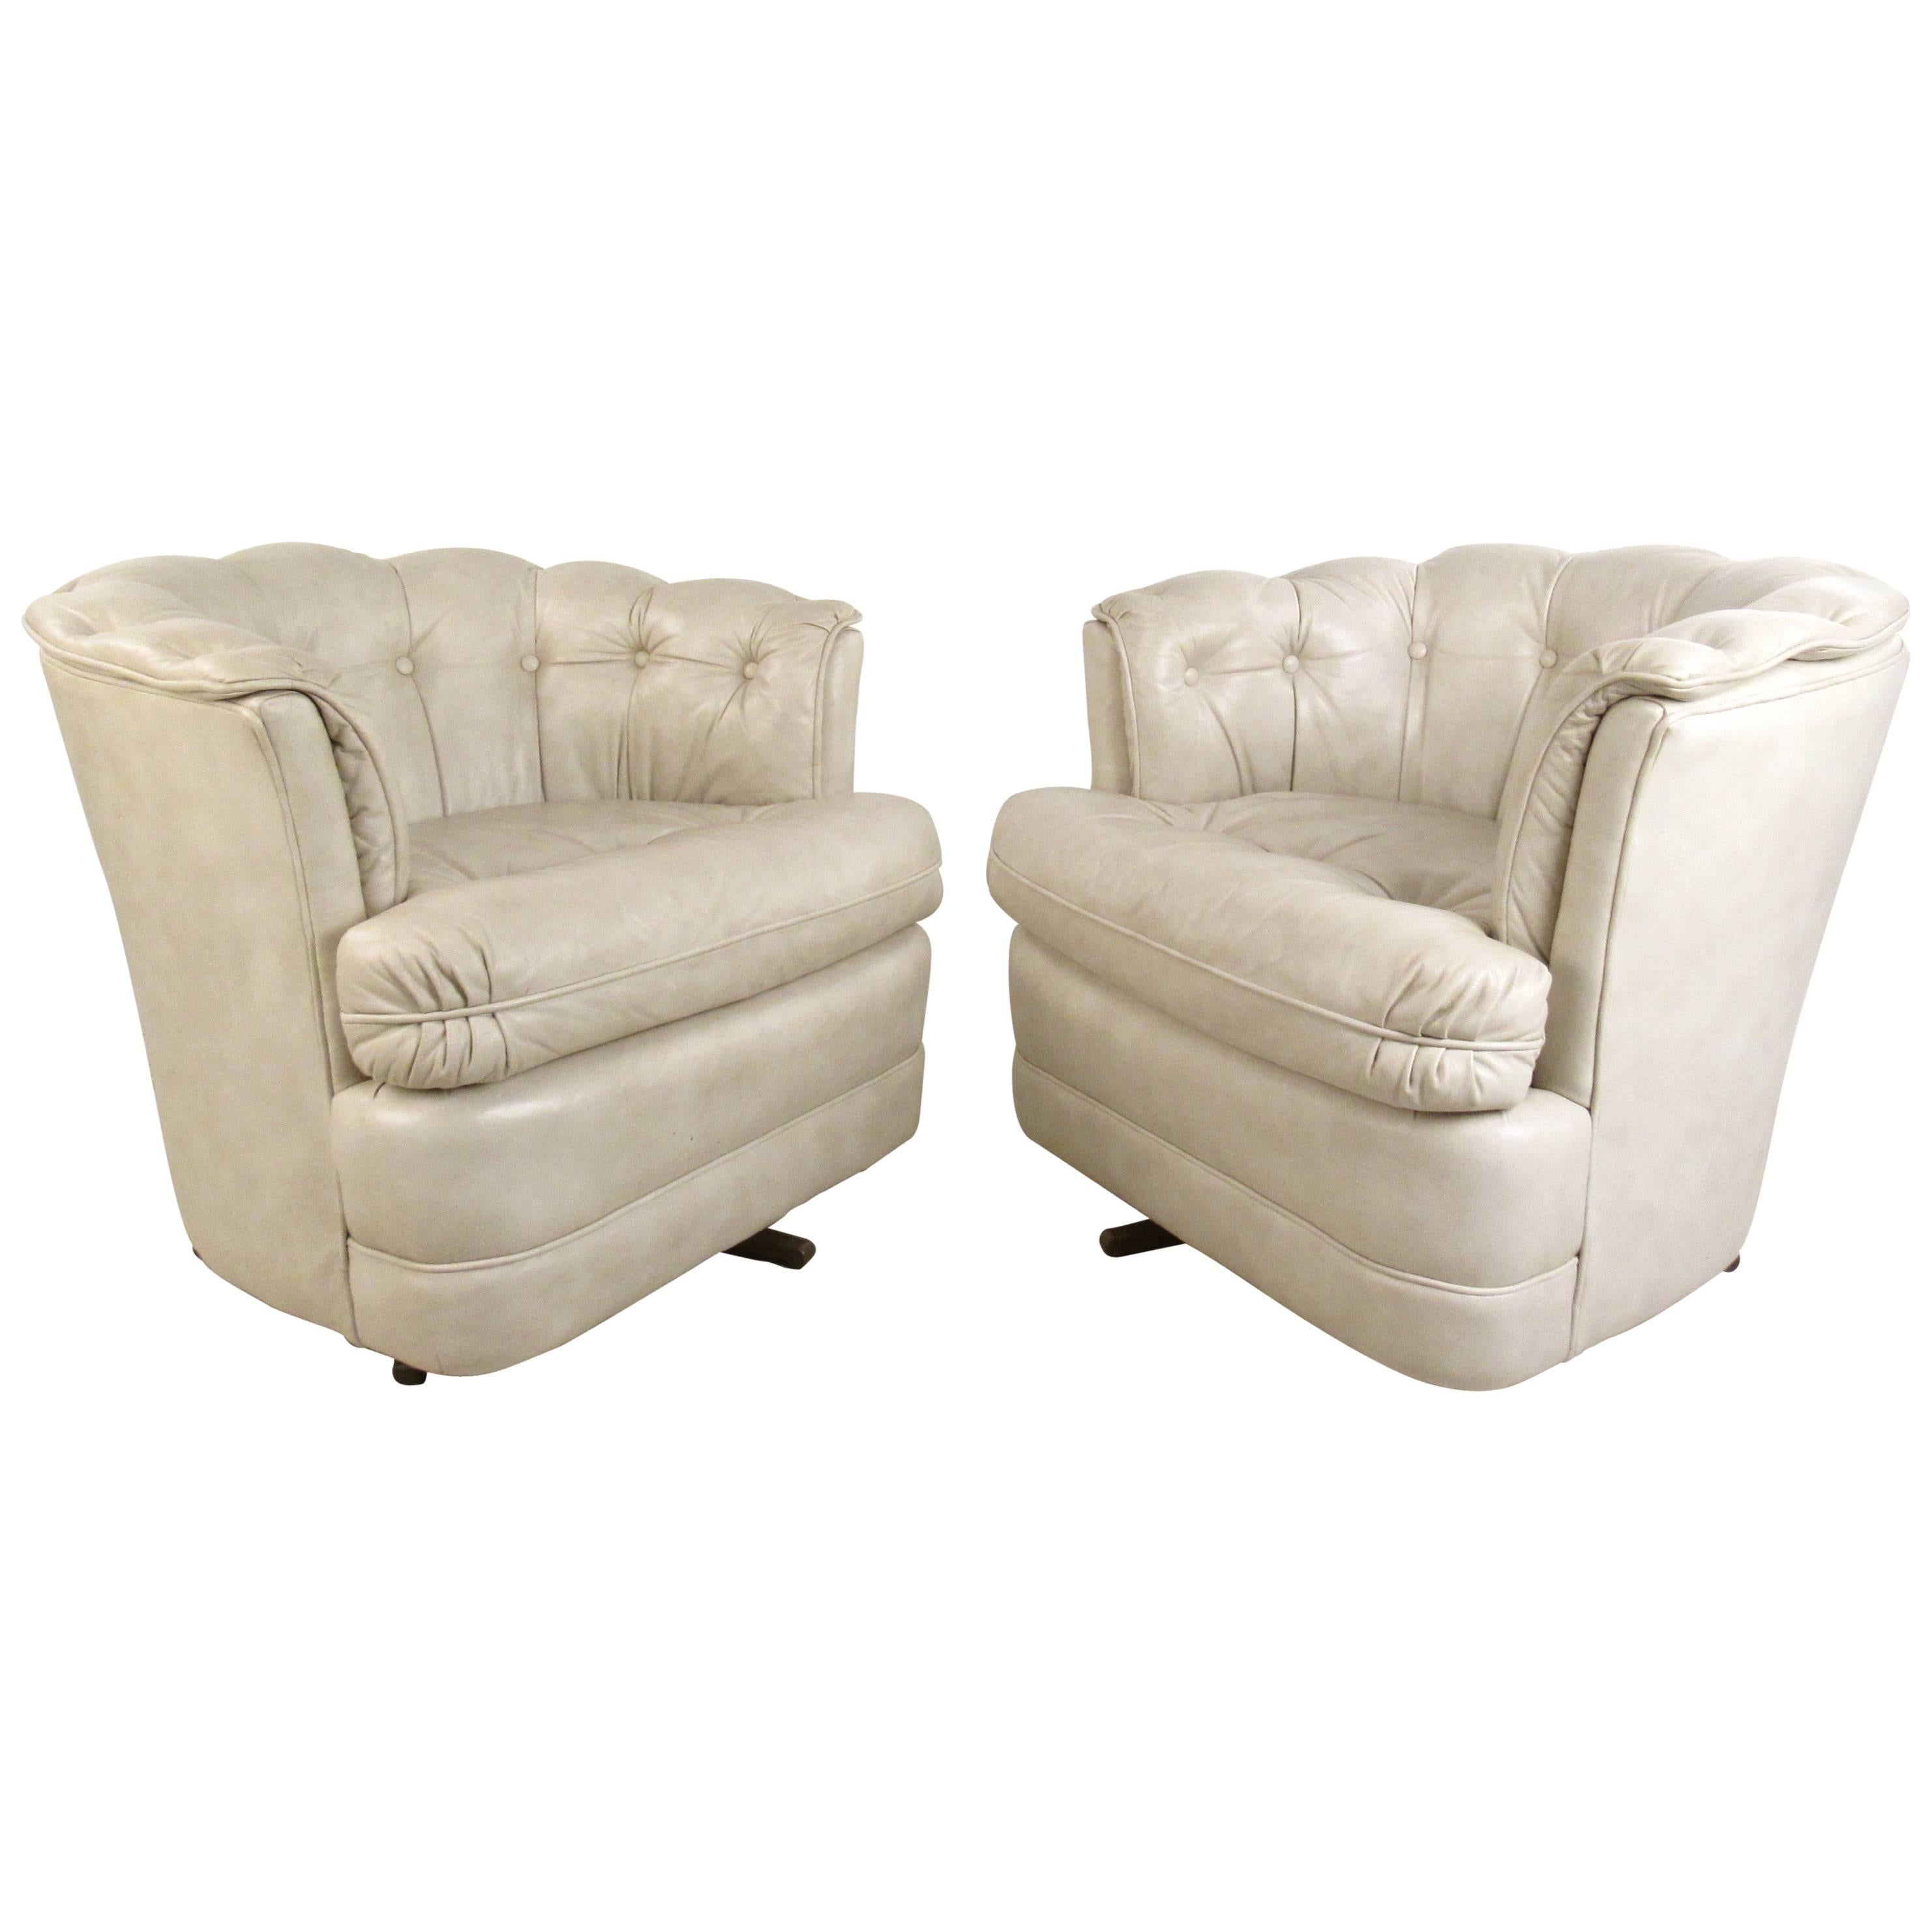 Pair of Vintage Tufted Leather Swivel Lounge Chairs, Mid-Century Modern